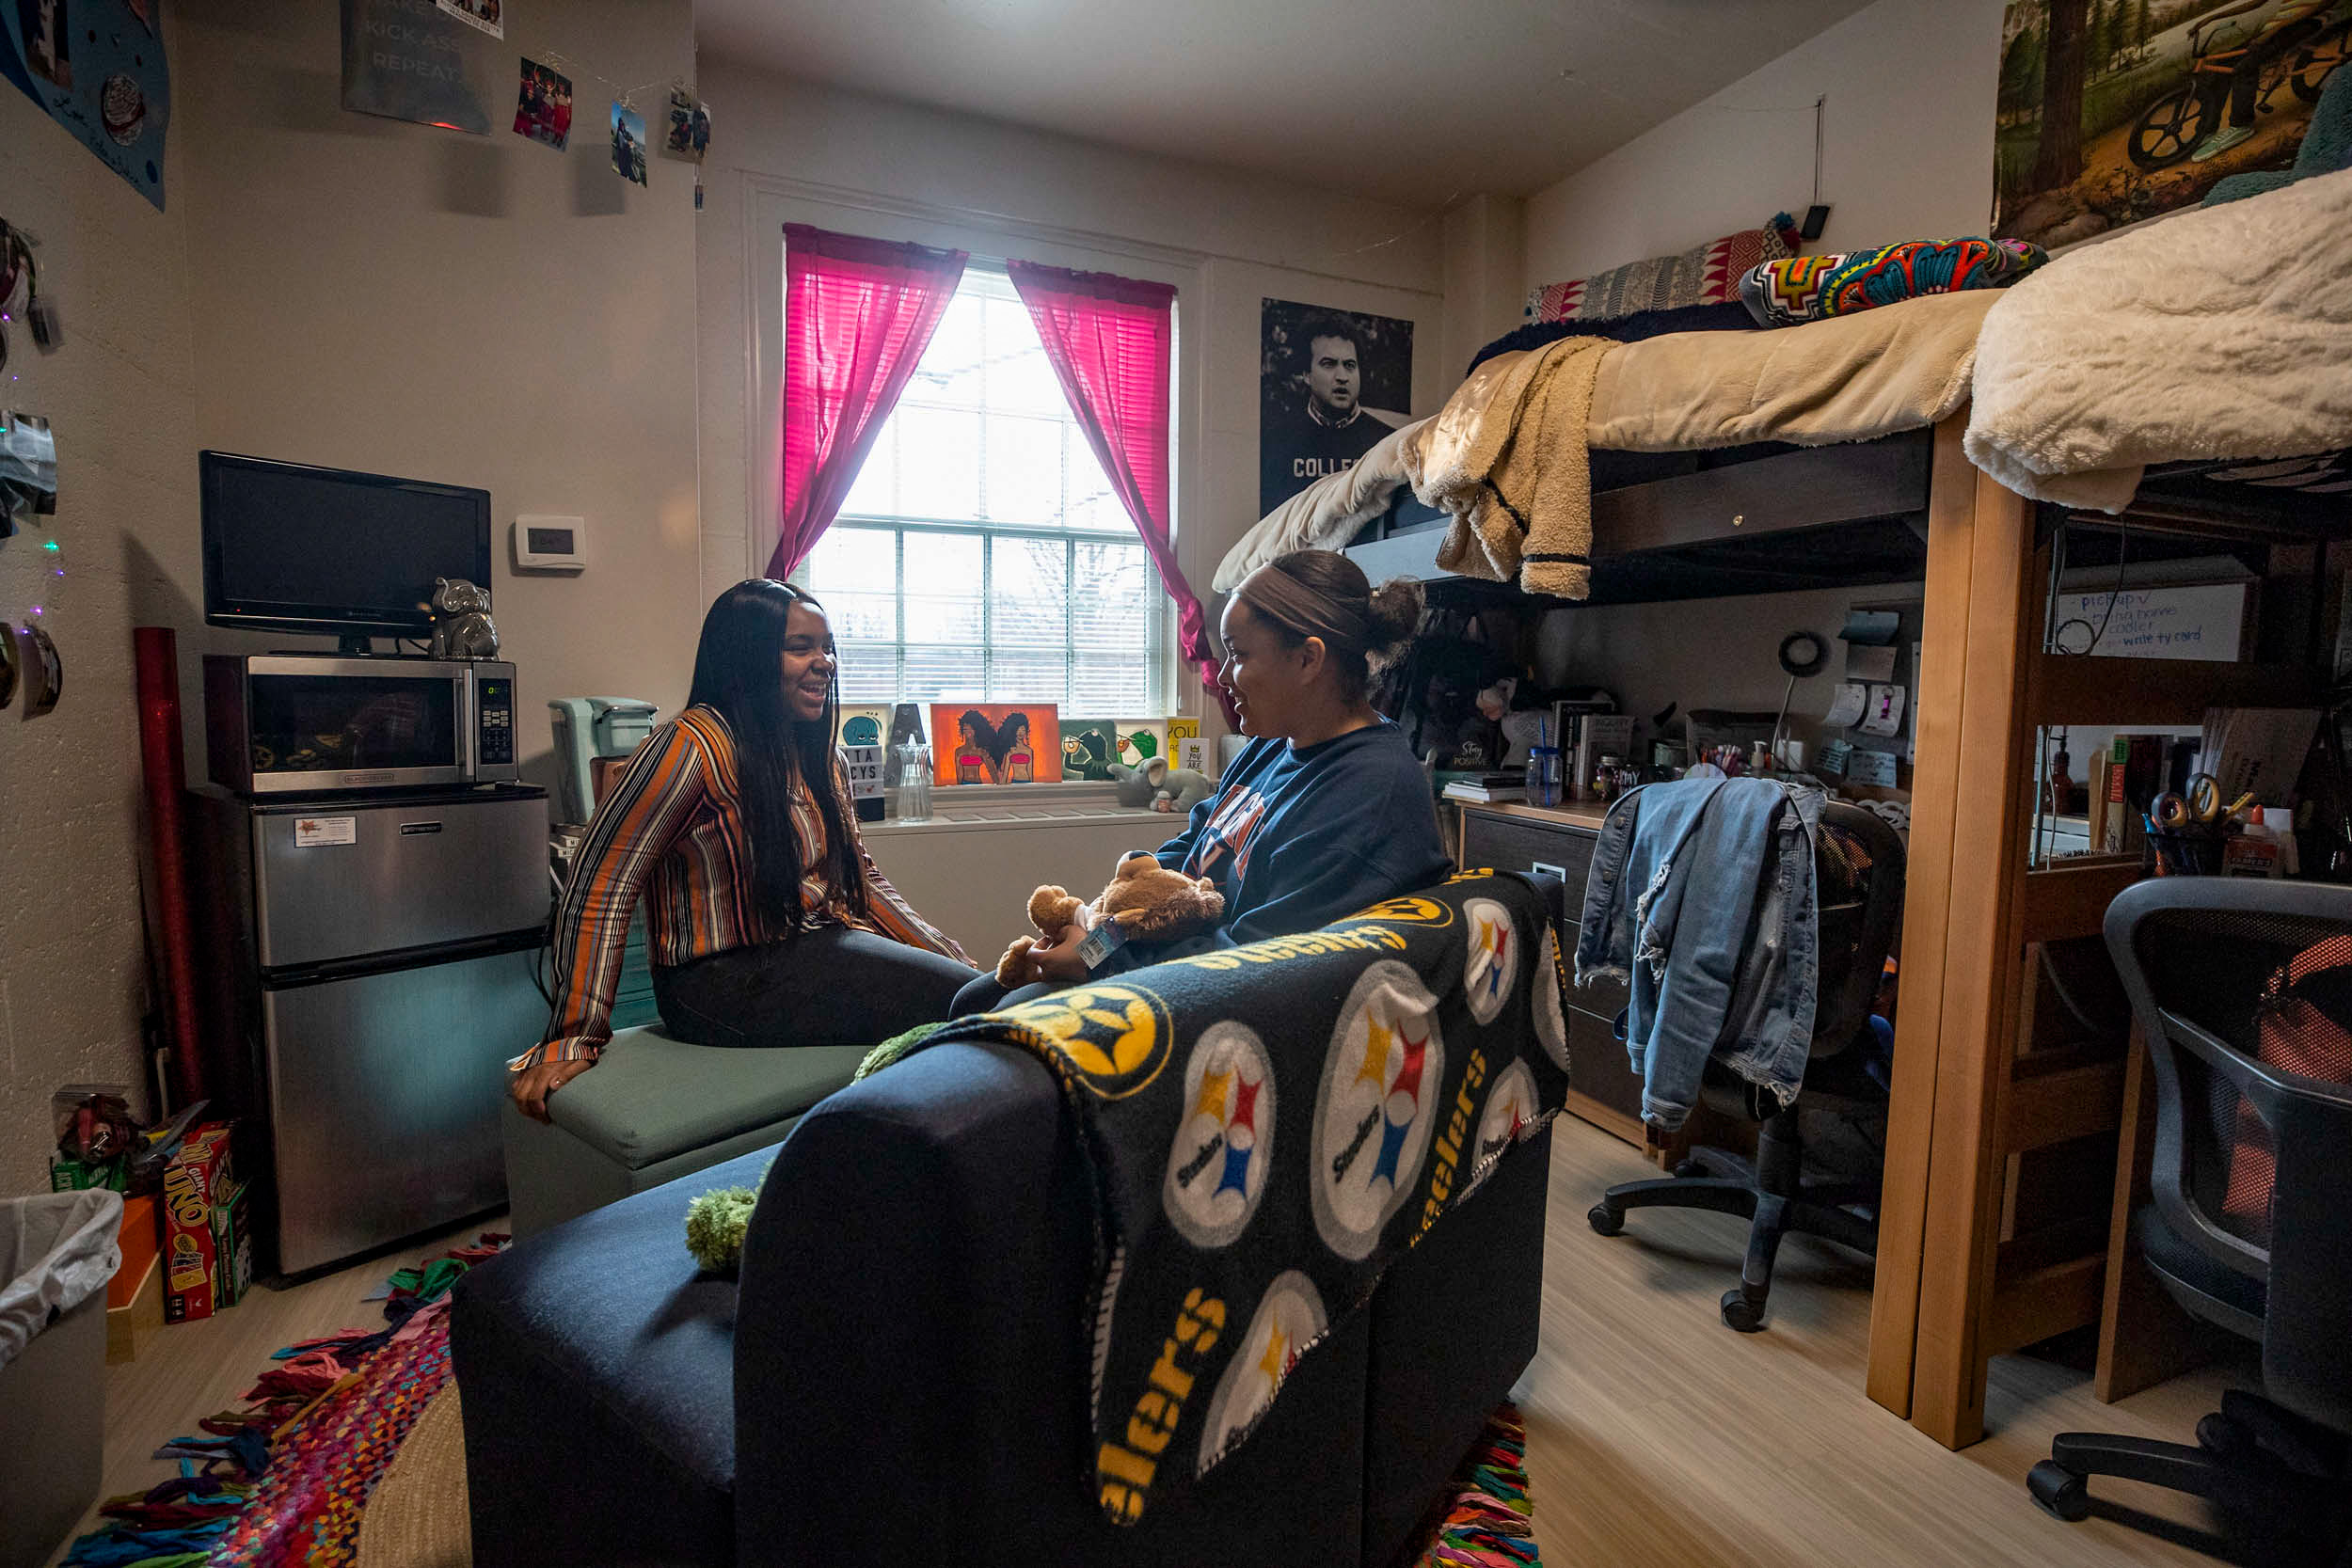 Alita Robinson, left, and Macy Brandon sit in their room chatting